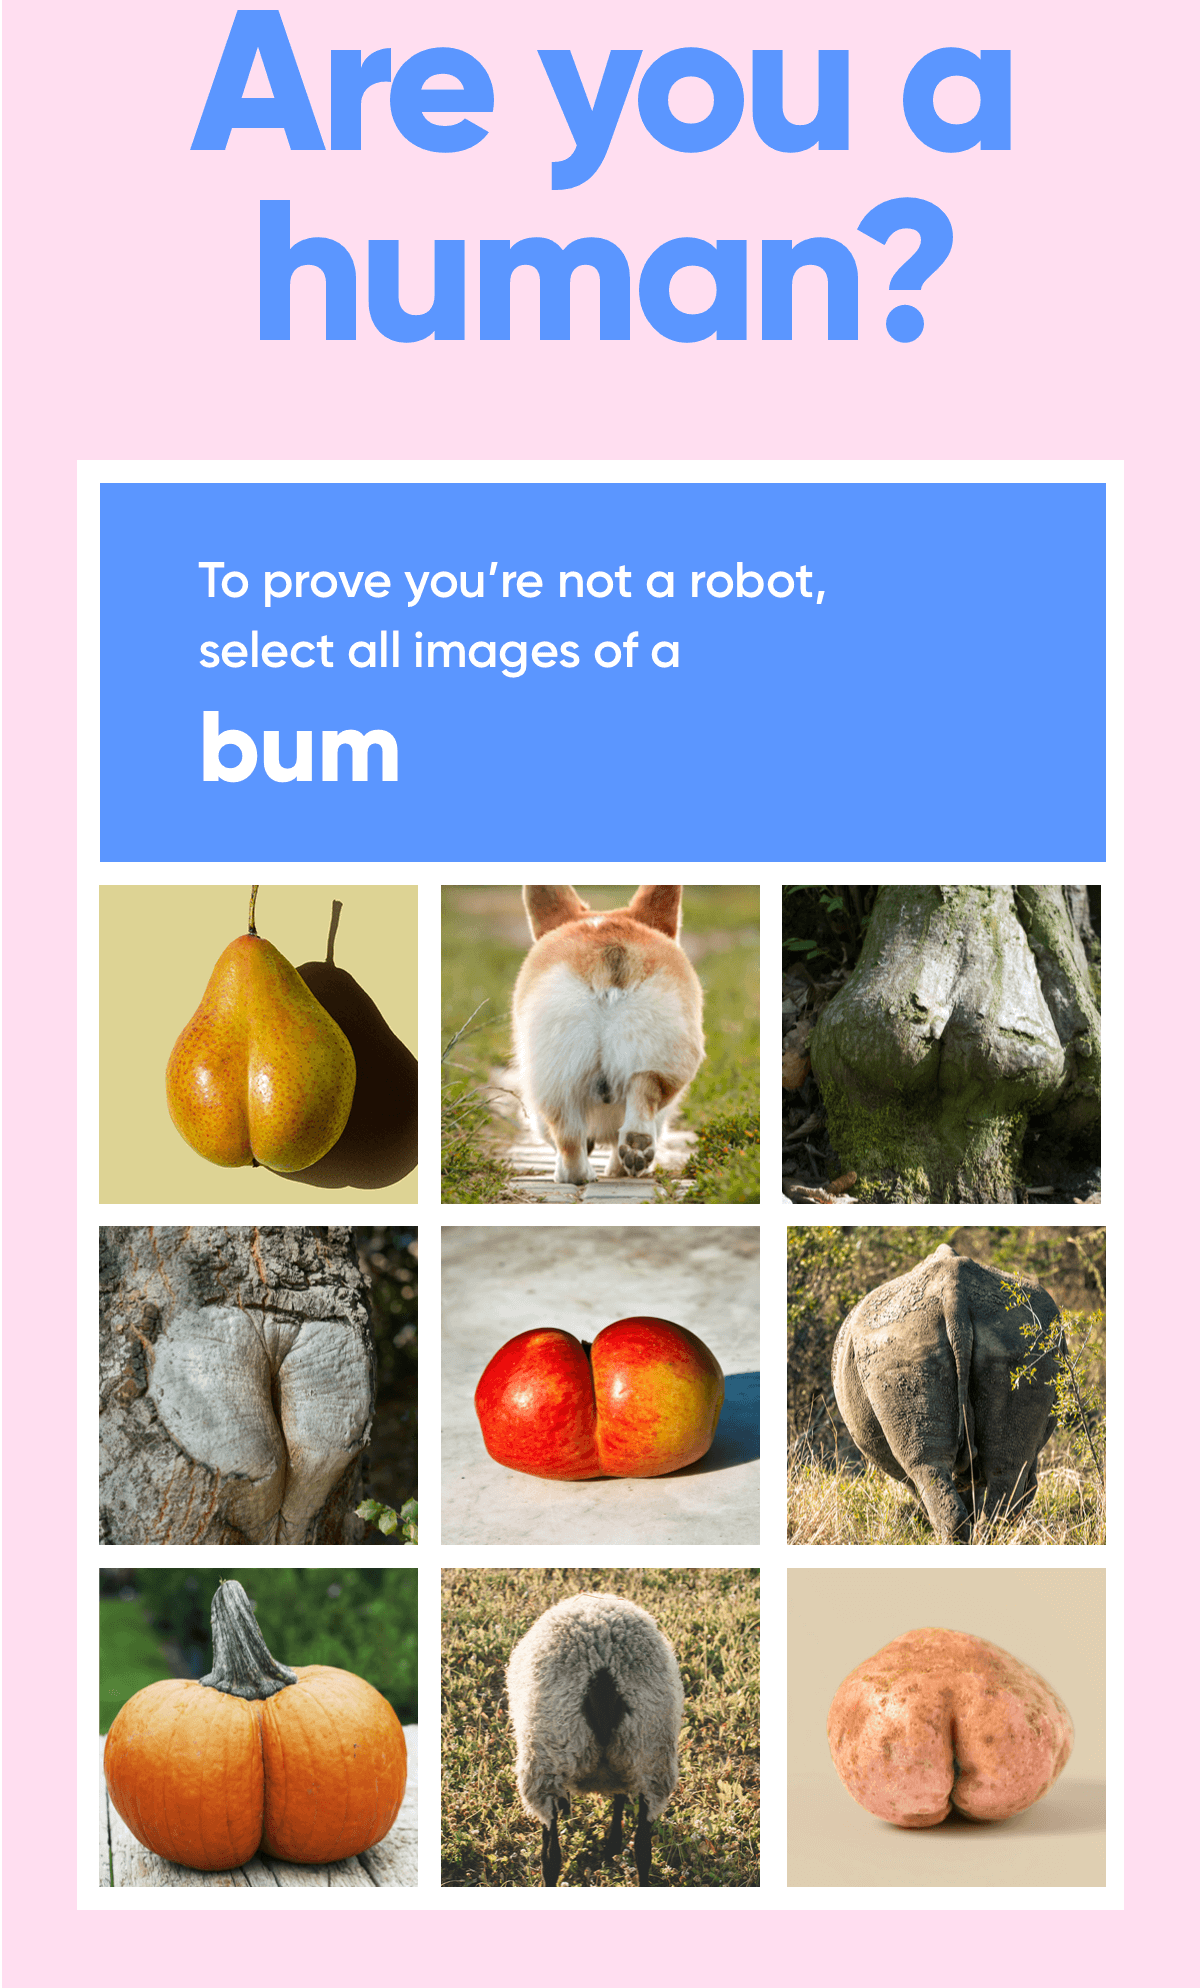 Image: Fruit and animal bums